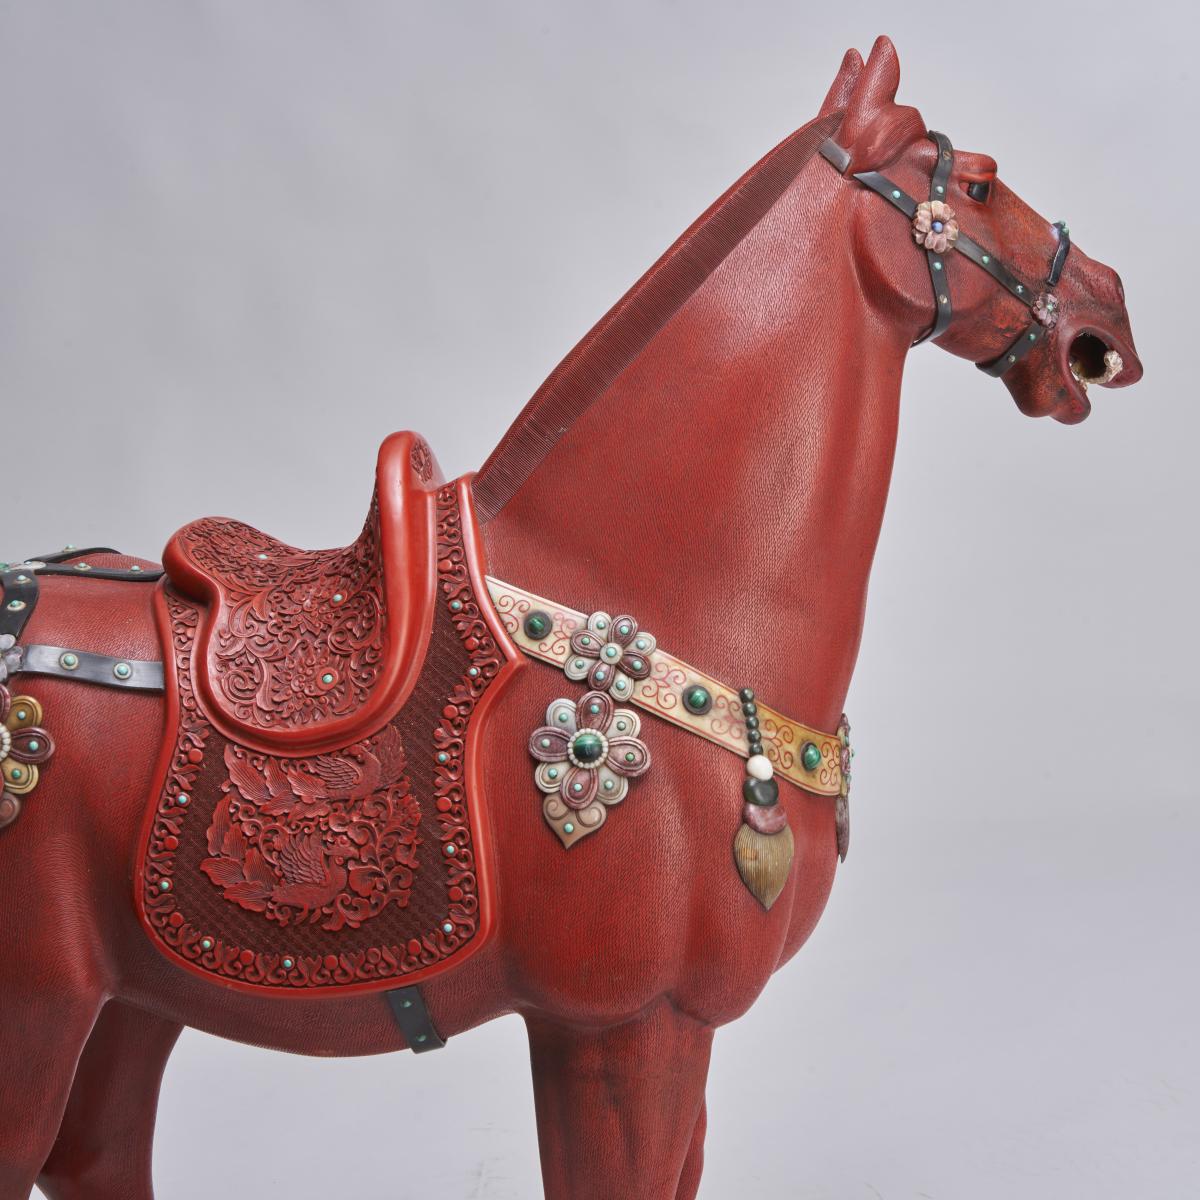 A very large late 19th/early 20th century Chinese lacquer horse (Red Hare)